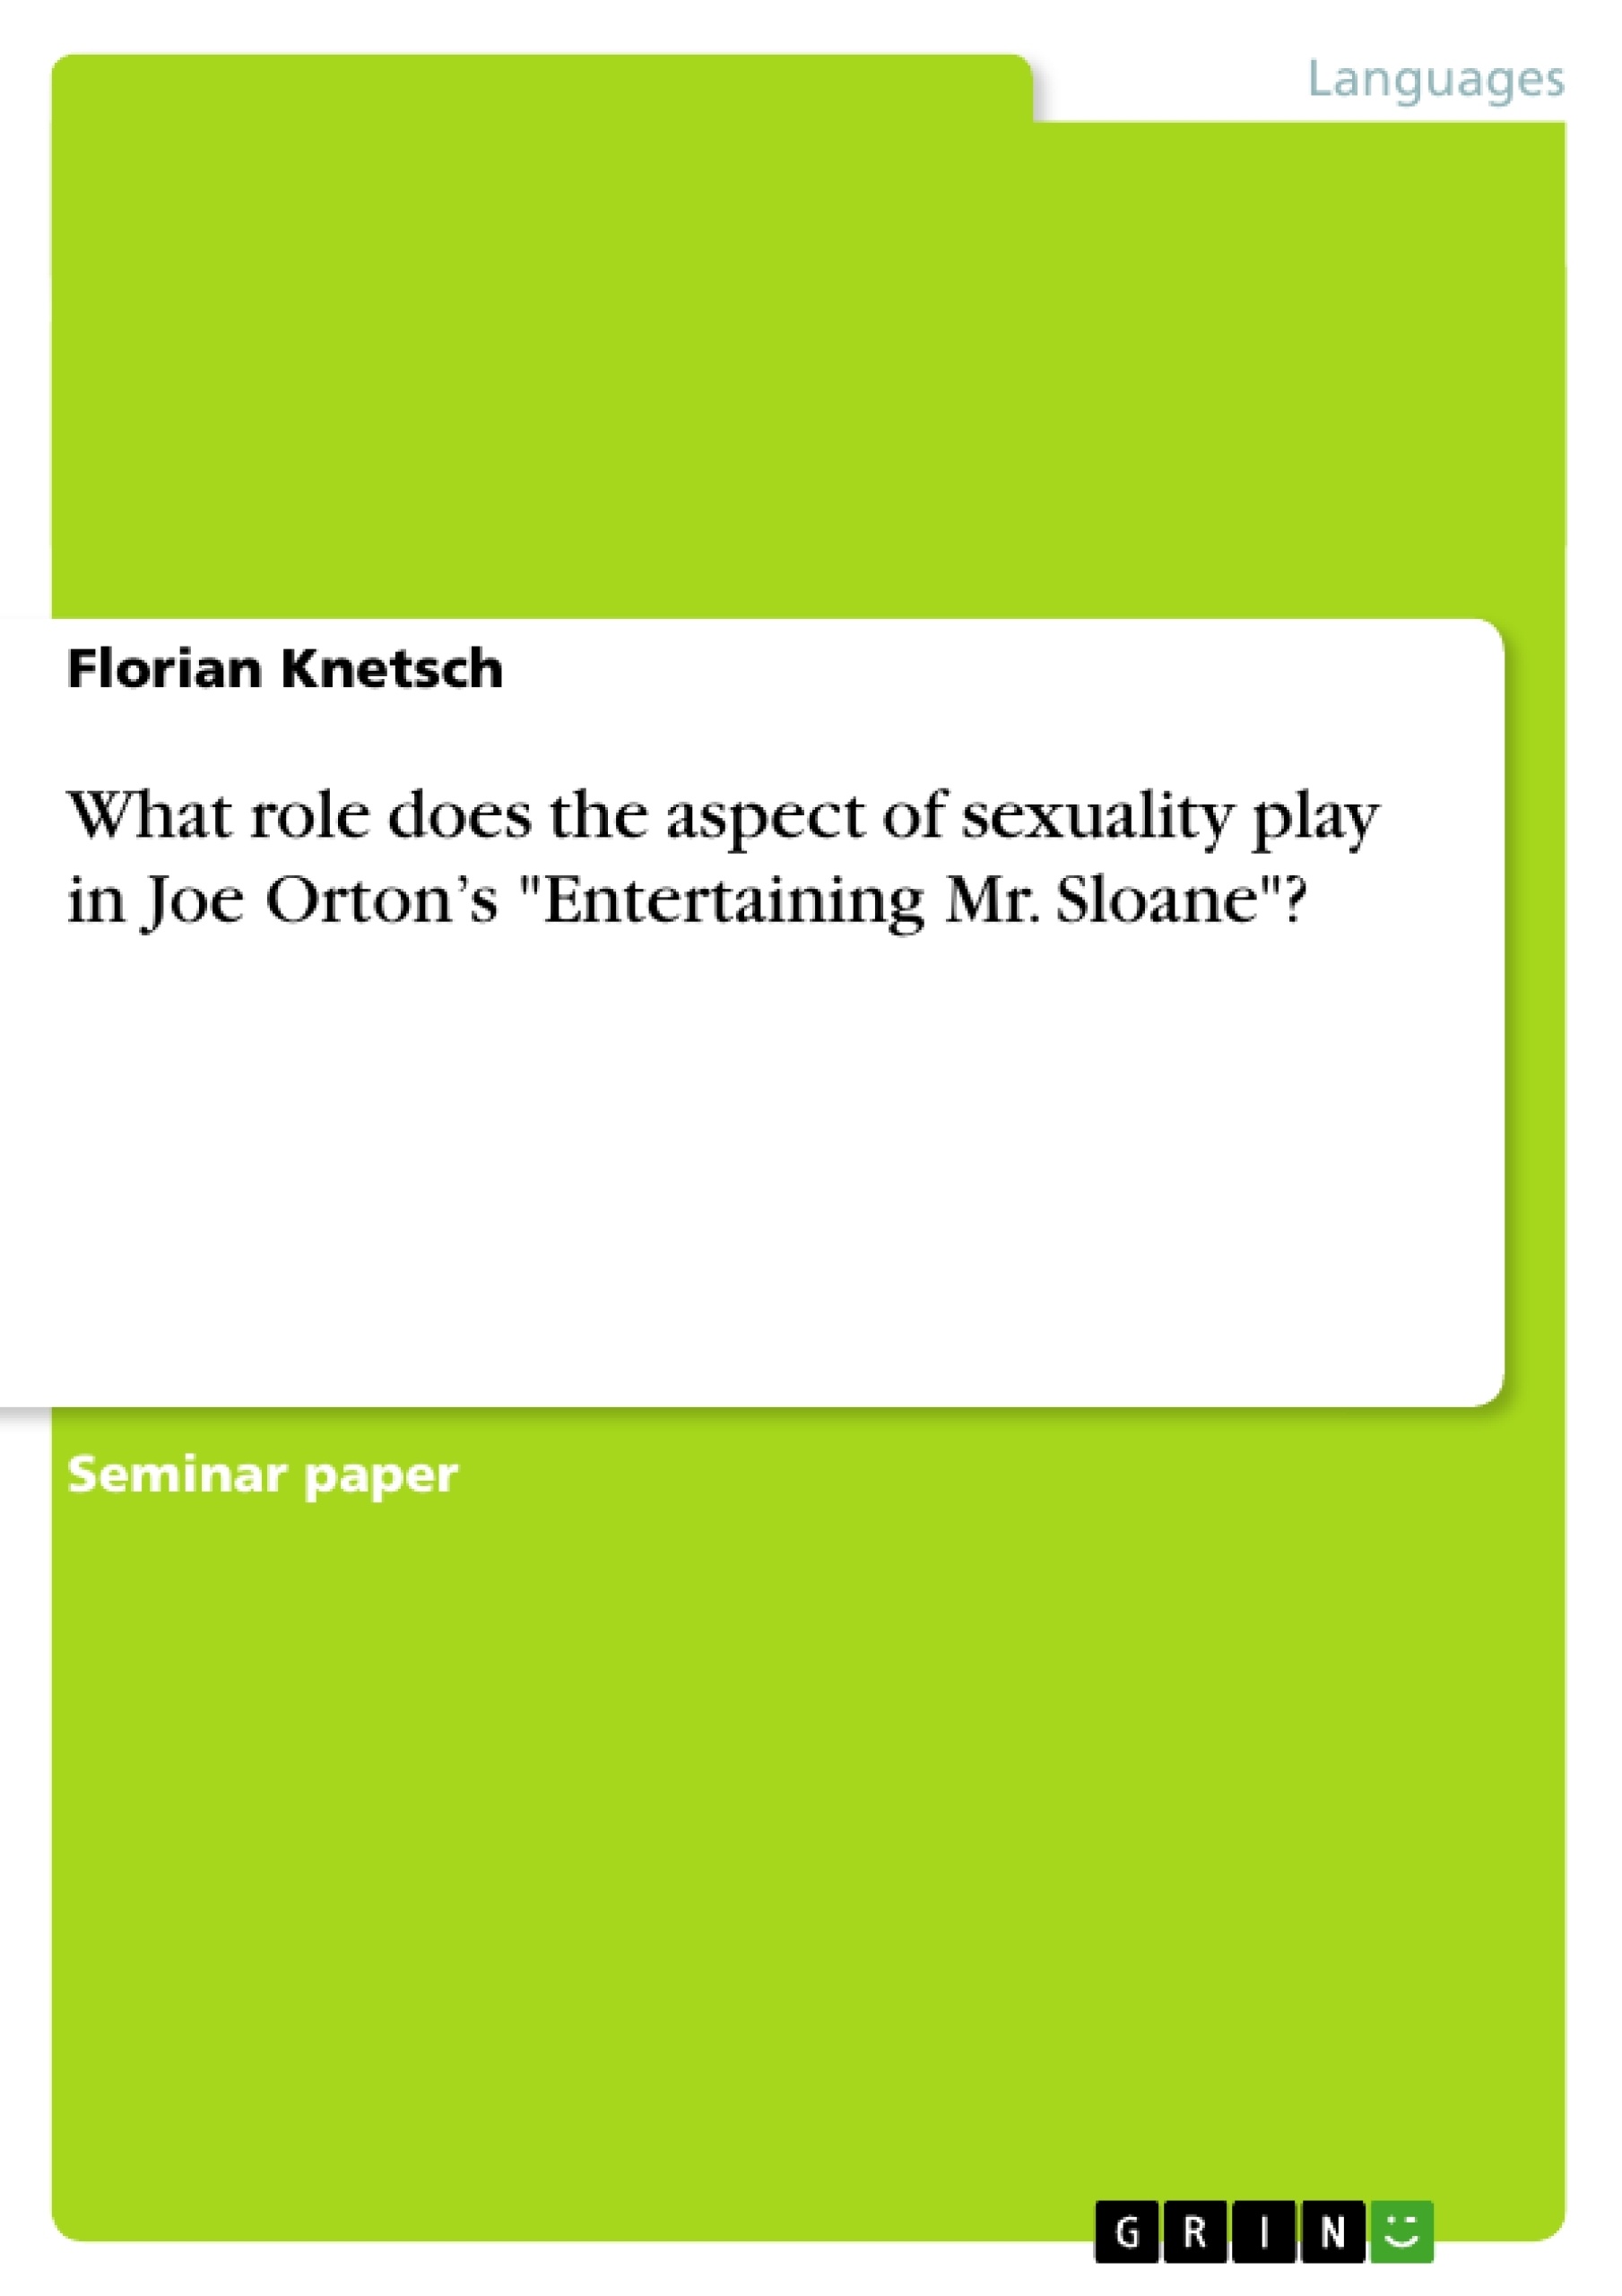 Titel: What role does the aspect of sexuality play in Joe Orton’s "Entertaining Mr. Sloane"?